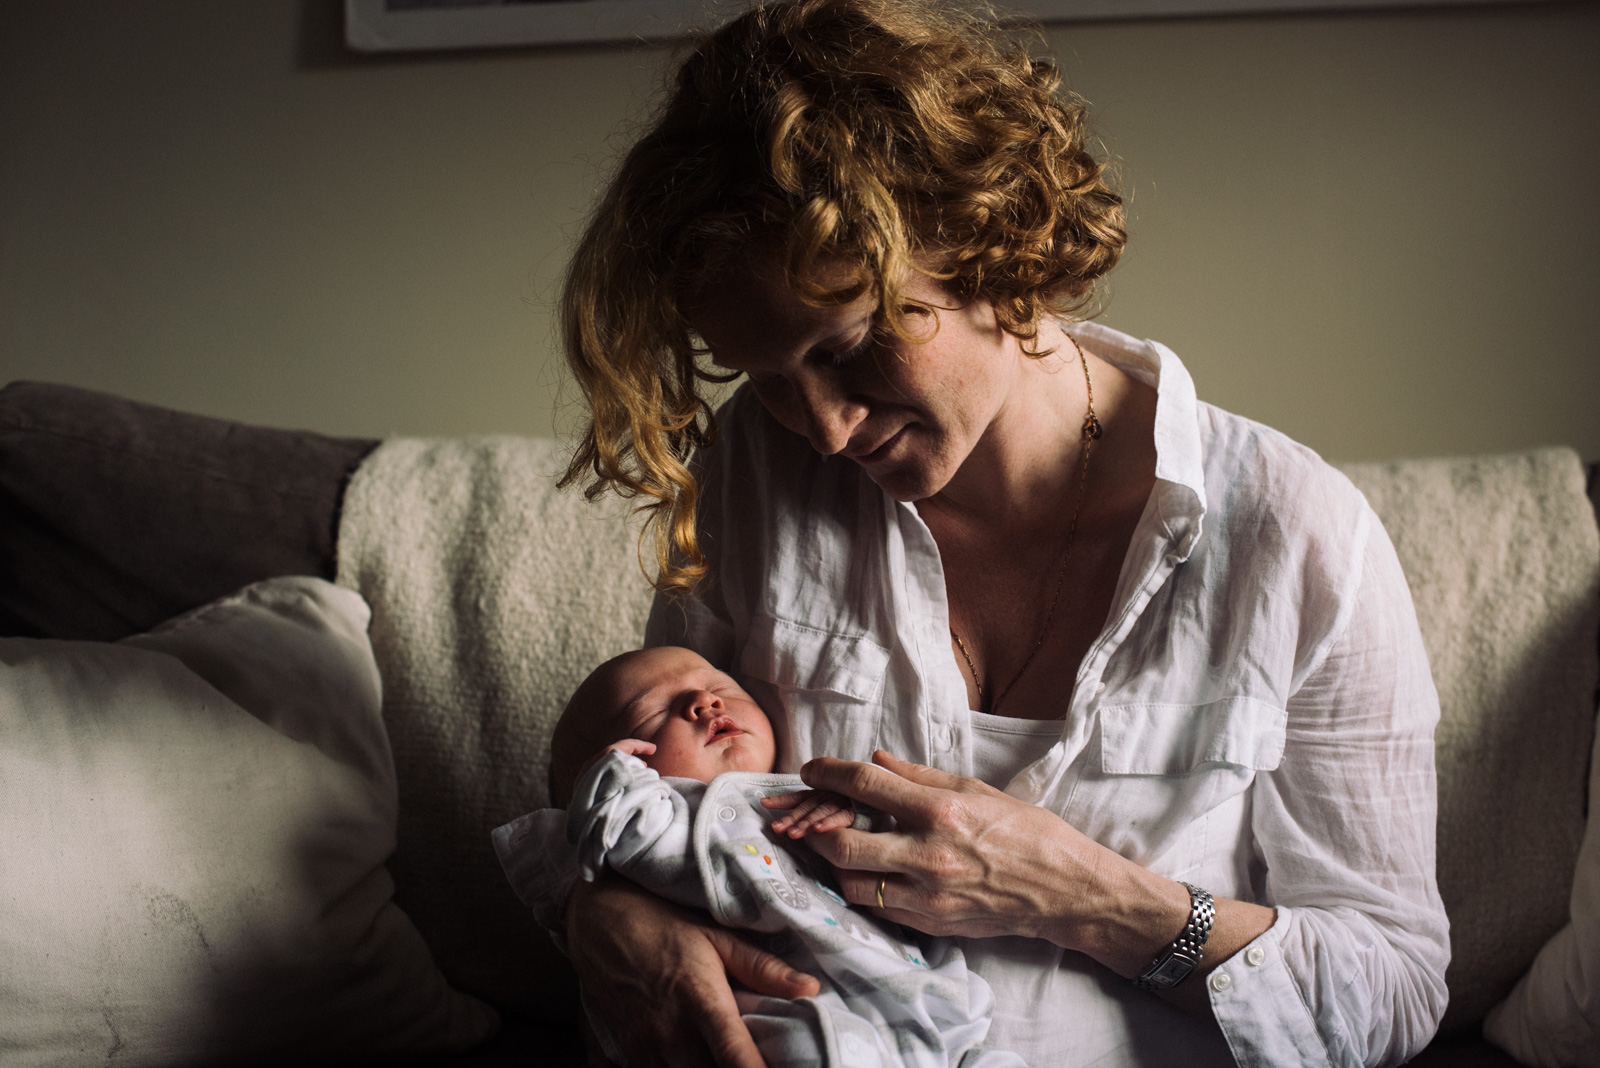 How New Moms Can Have a Positive, Mindful Postpartum Journey